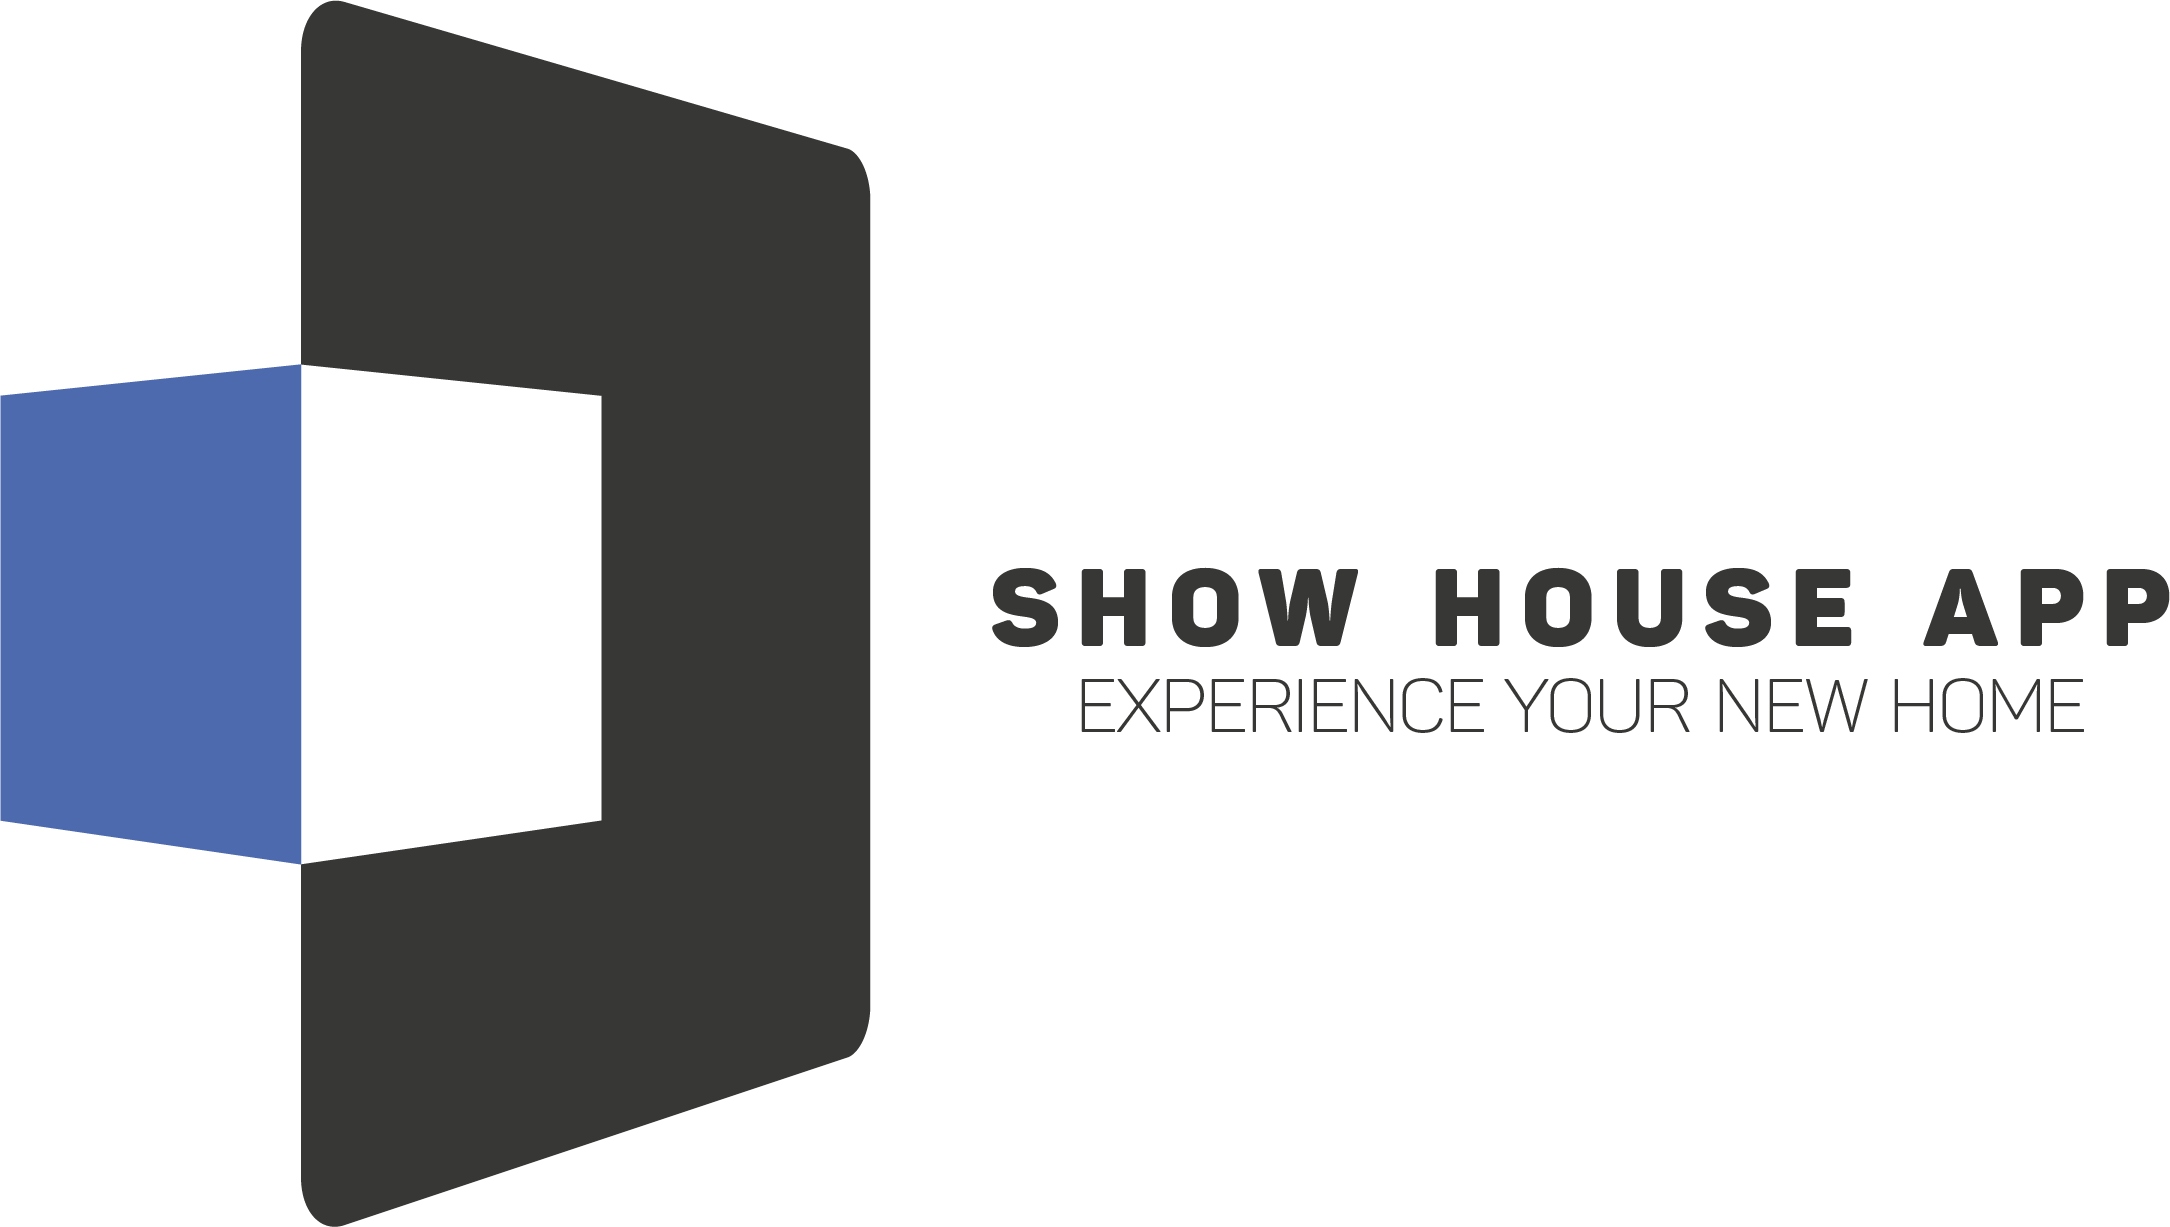 Show House App running on multiple devices